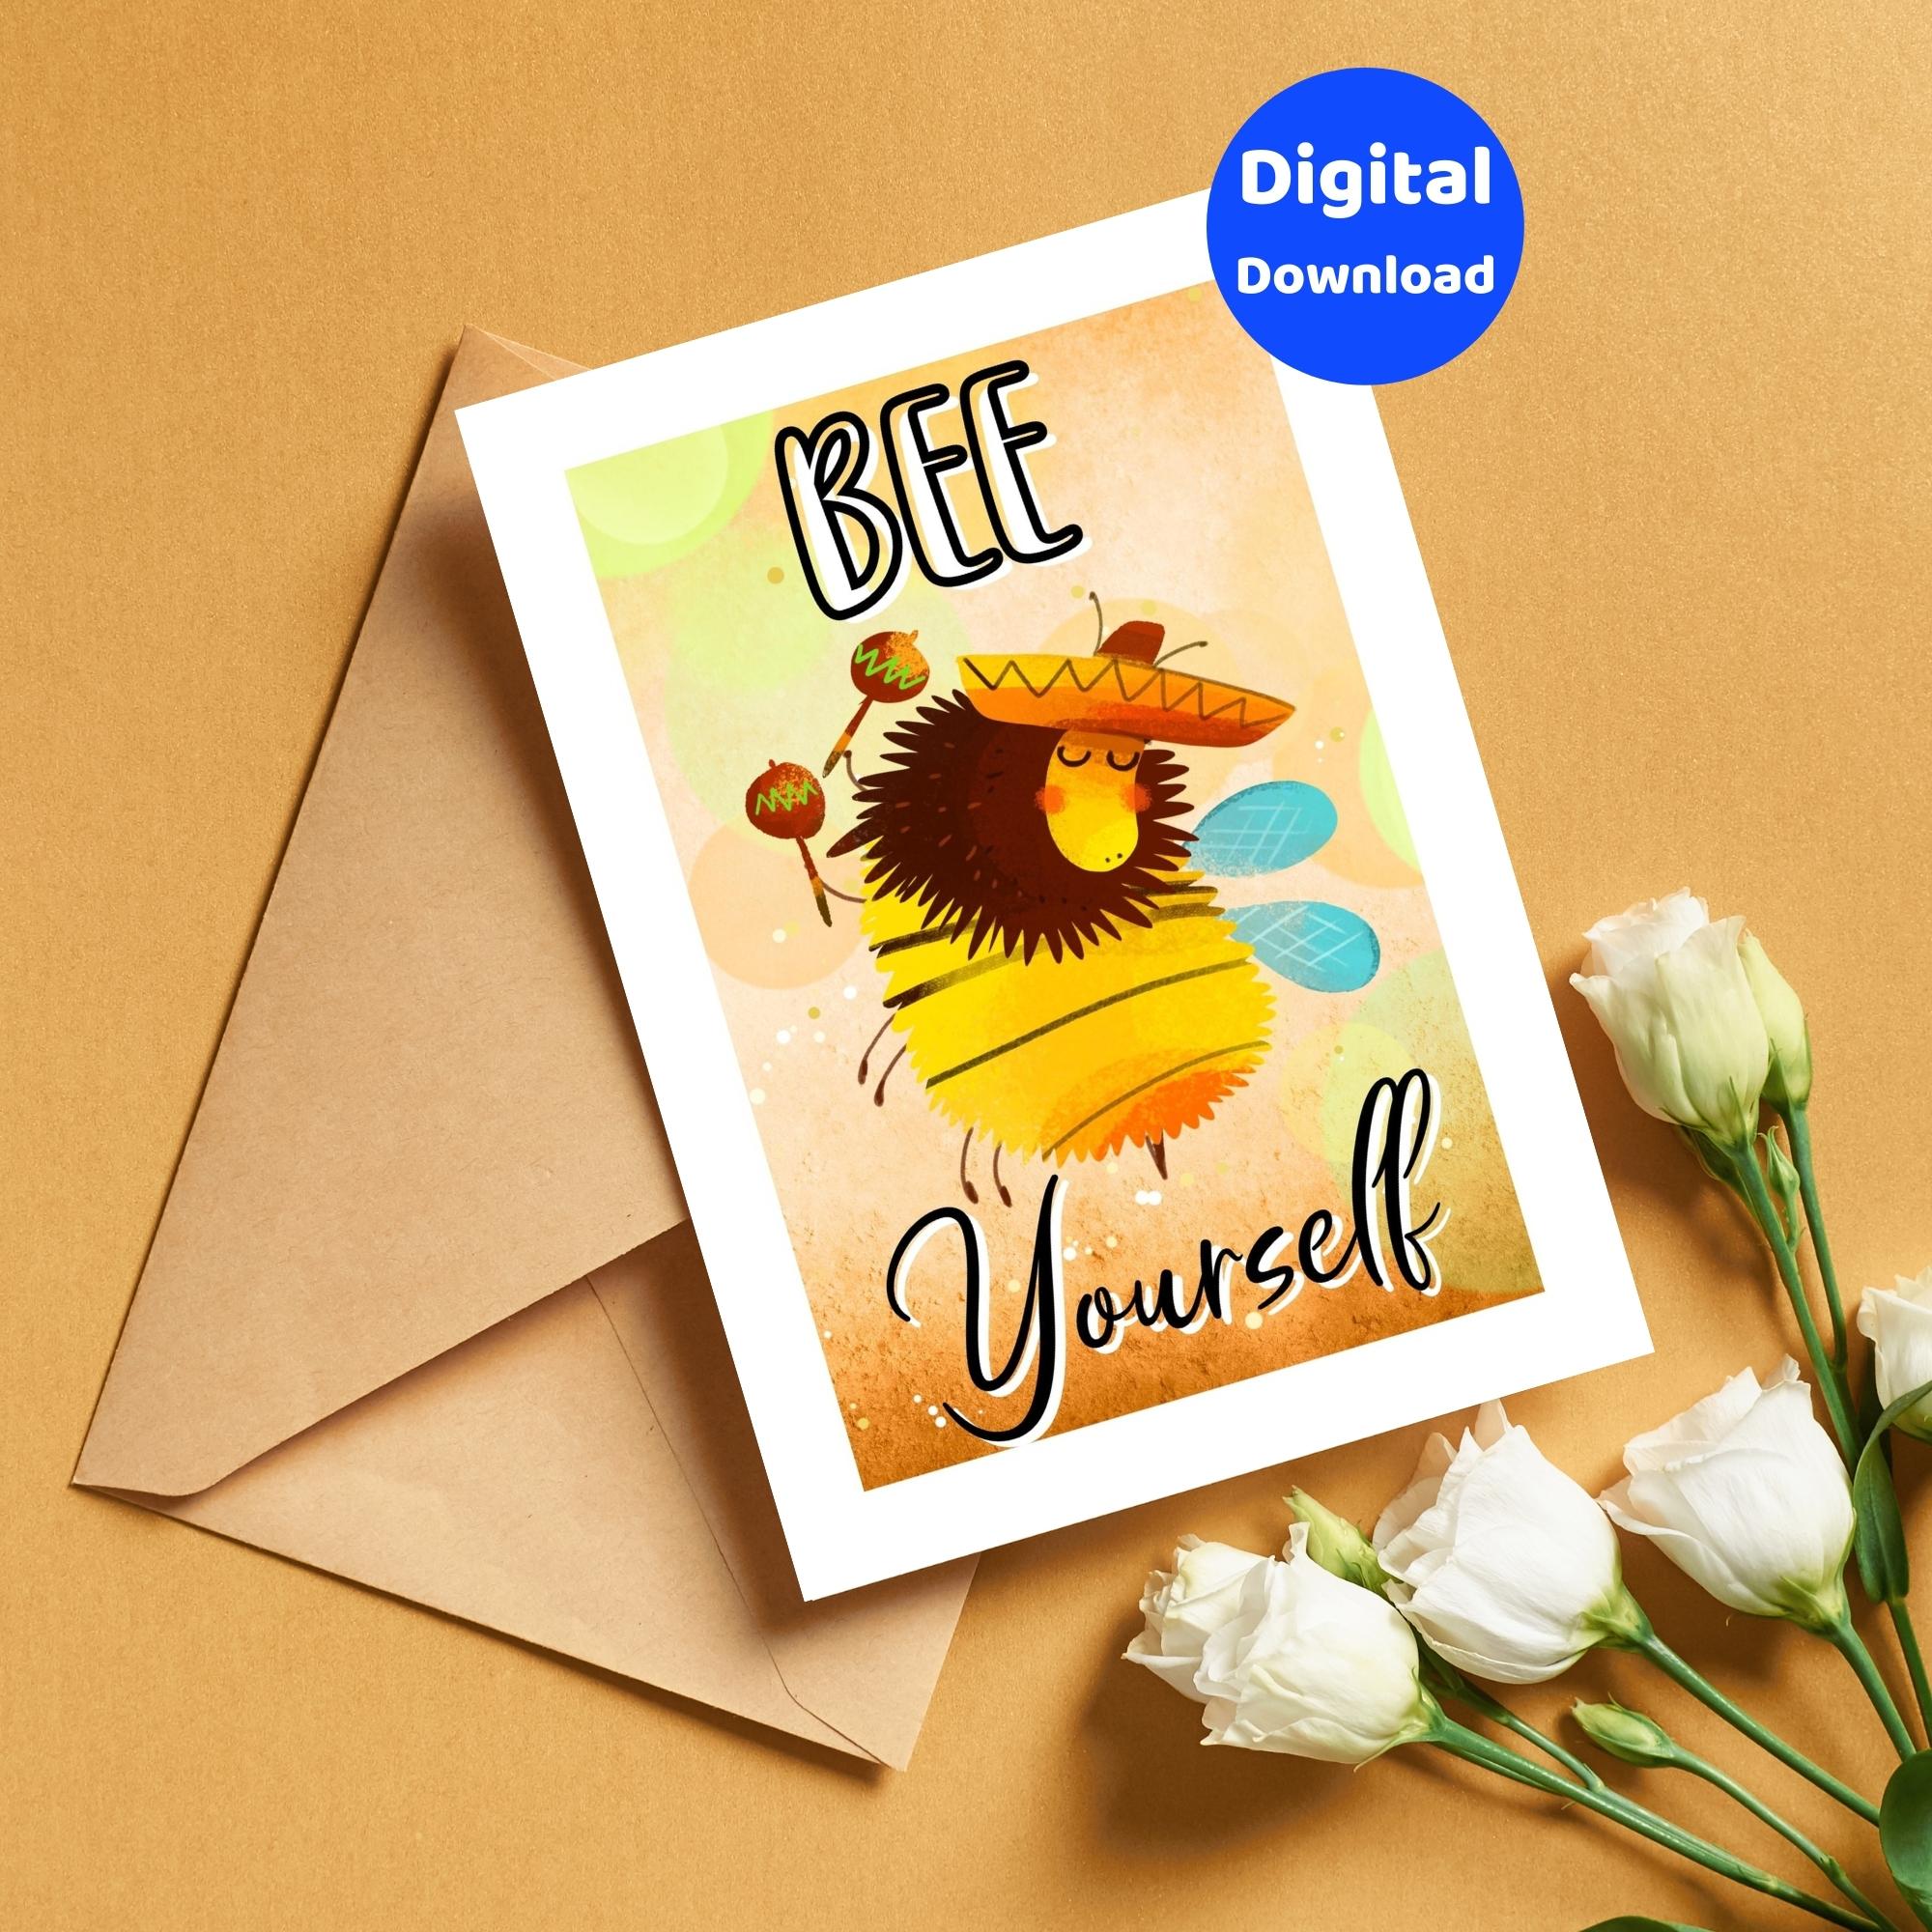 A printable bee greeting card with the sentiment "Bee Yourself".